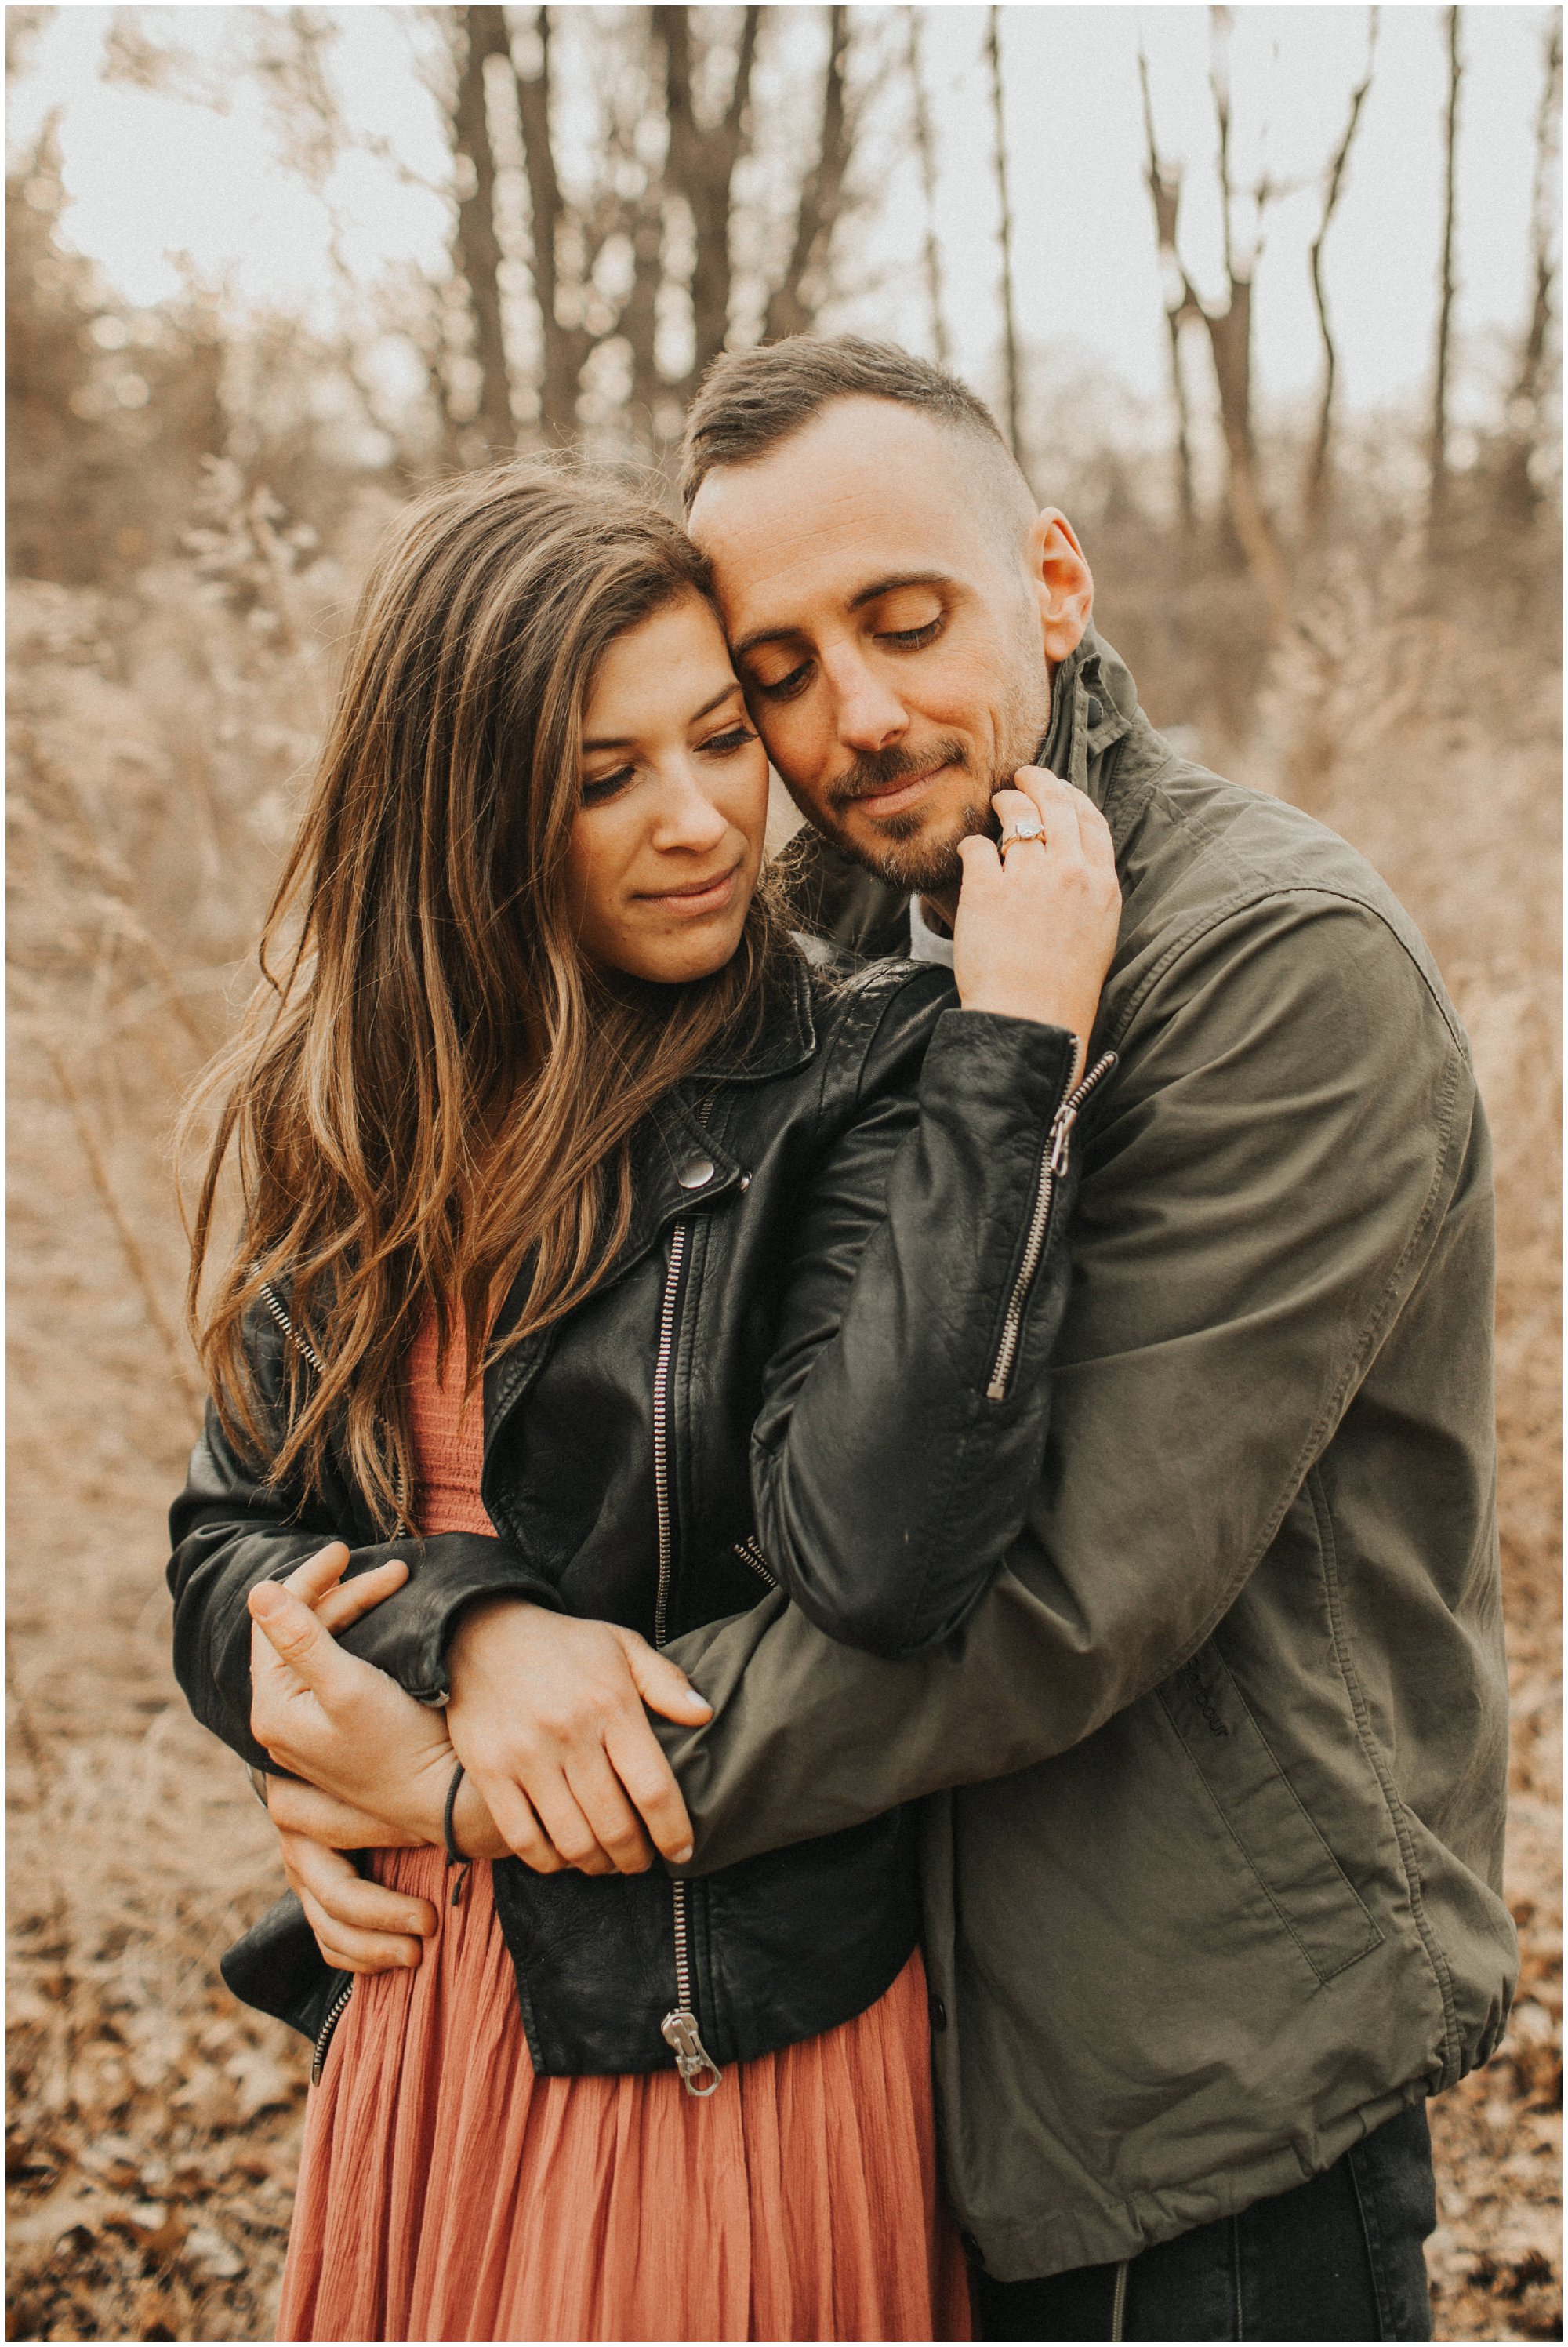 romantic vintage fun candid spring engagement photography in field 